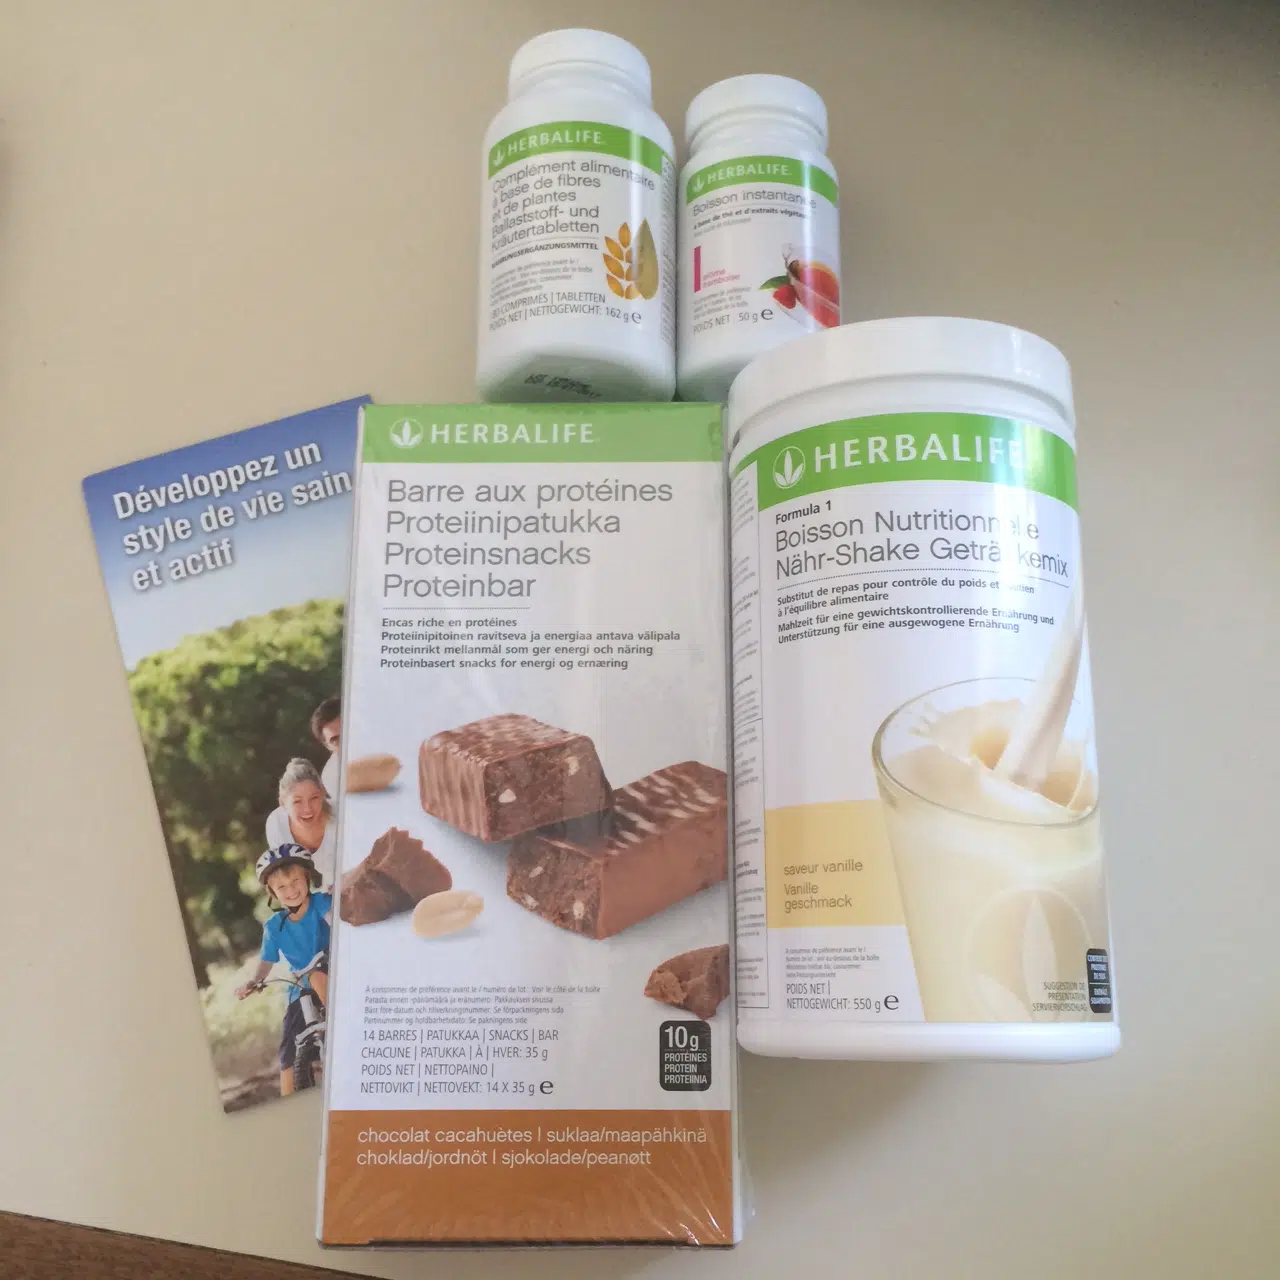 Les compléments alimentaires Herbalife